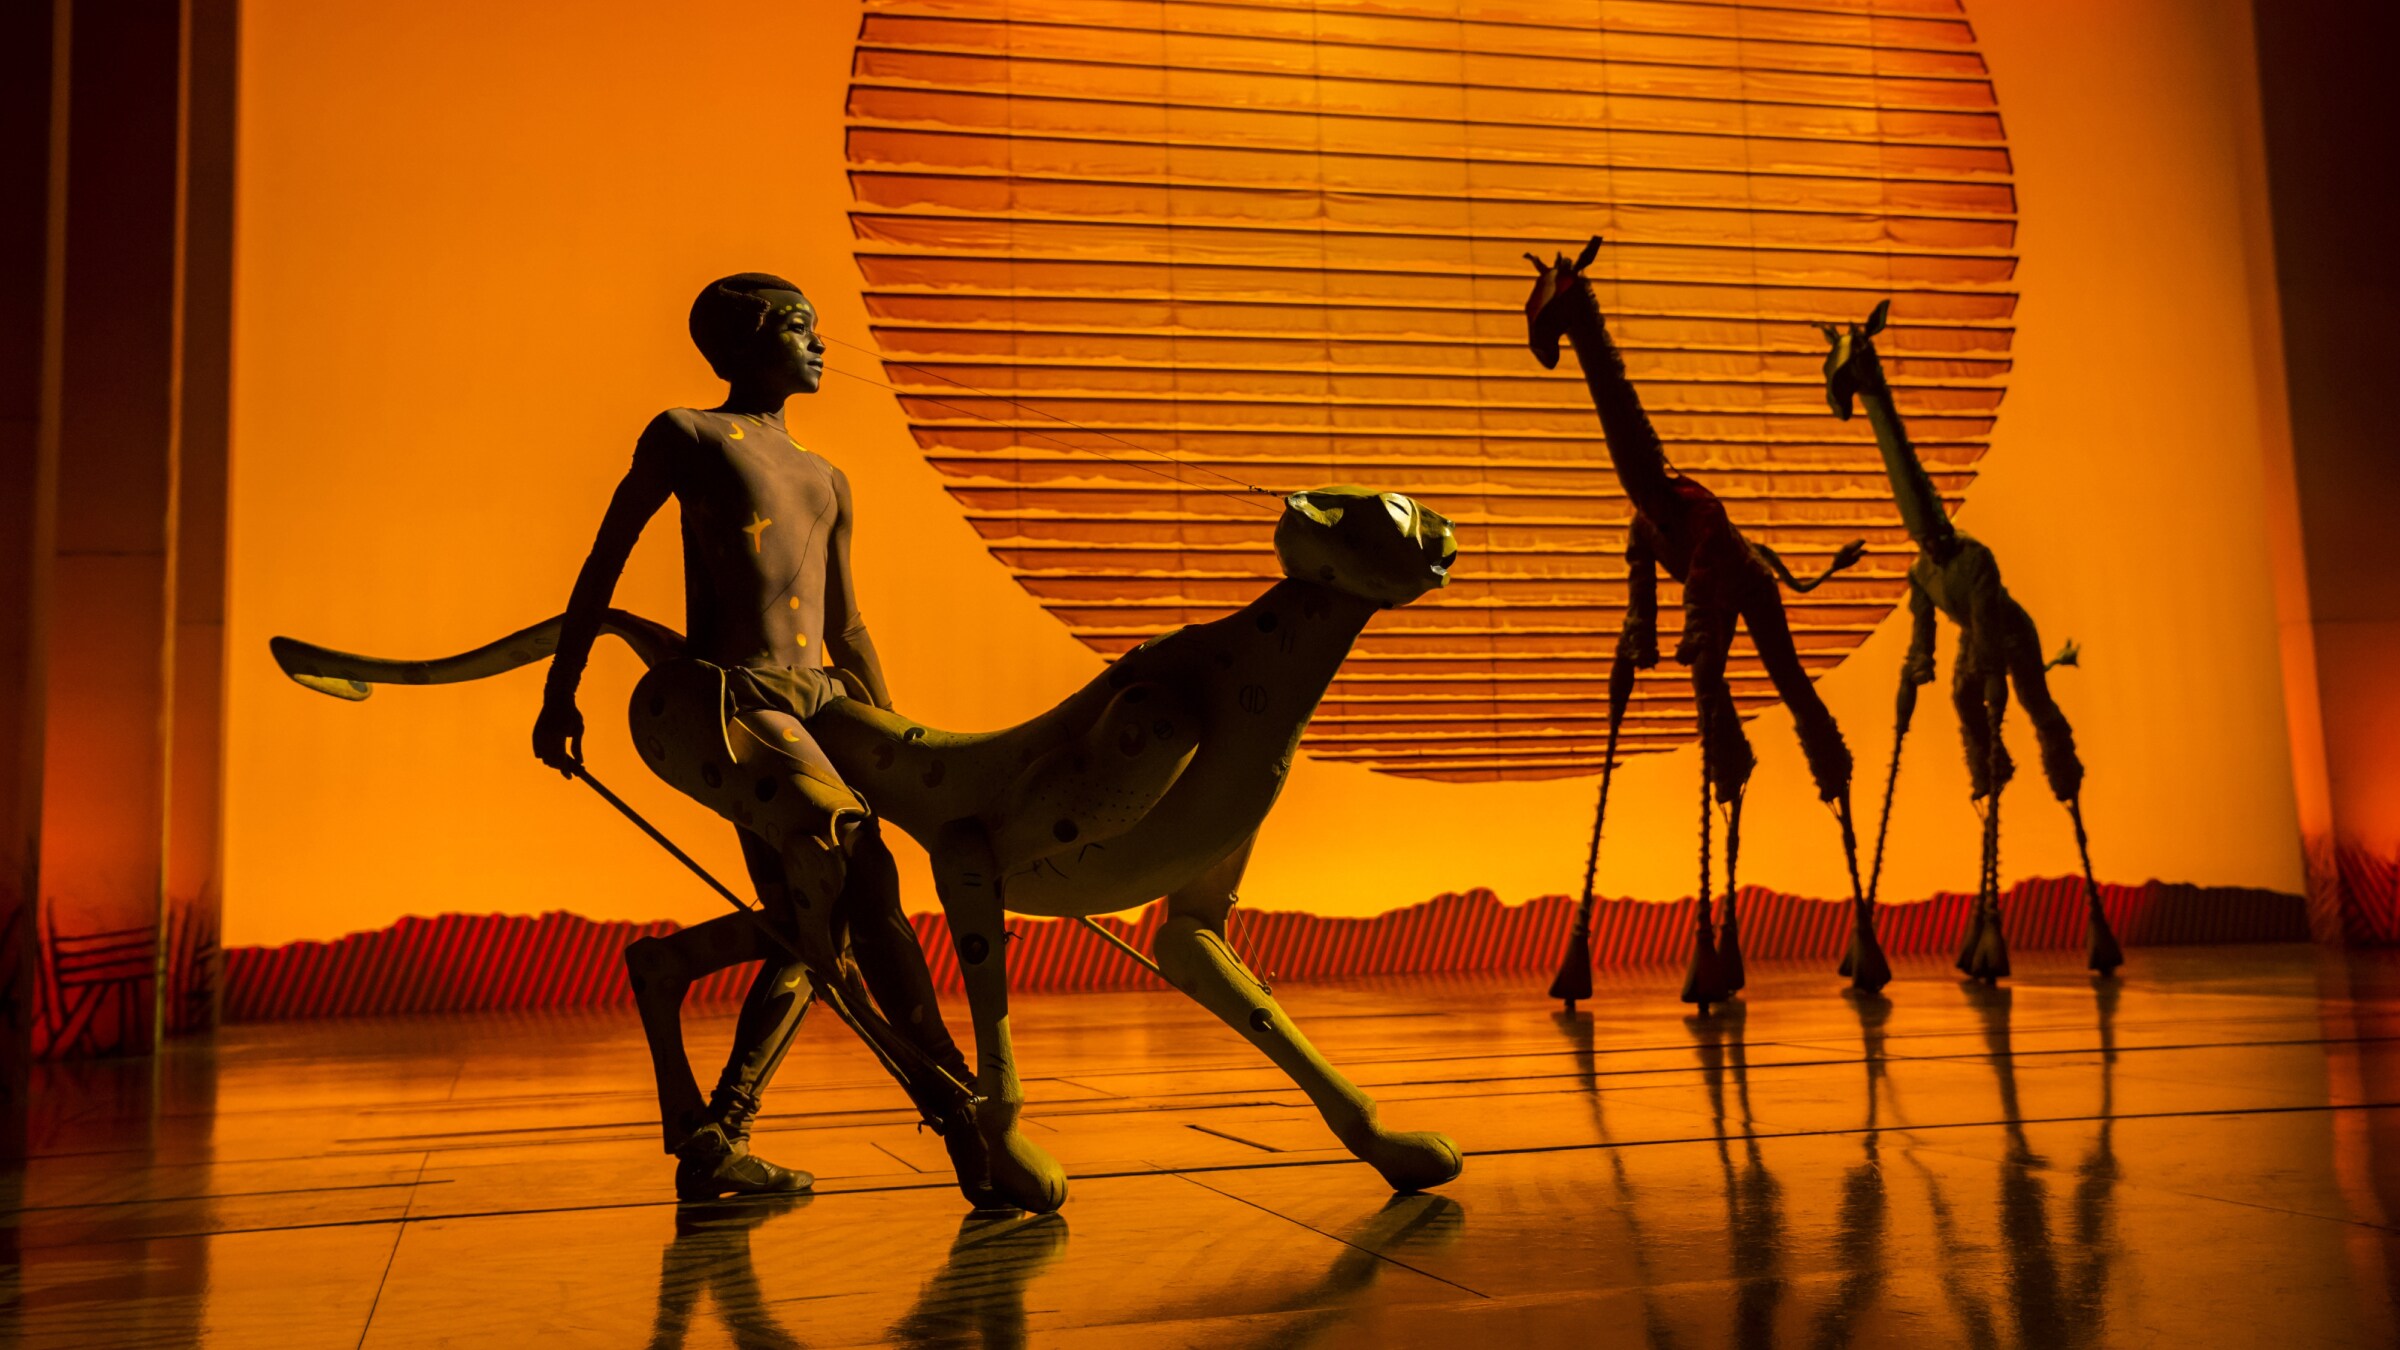 Cast members on stage in different animal costumes, including giraffes.